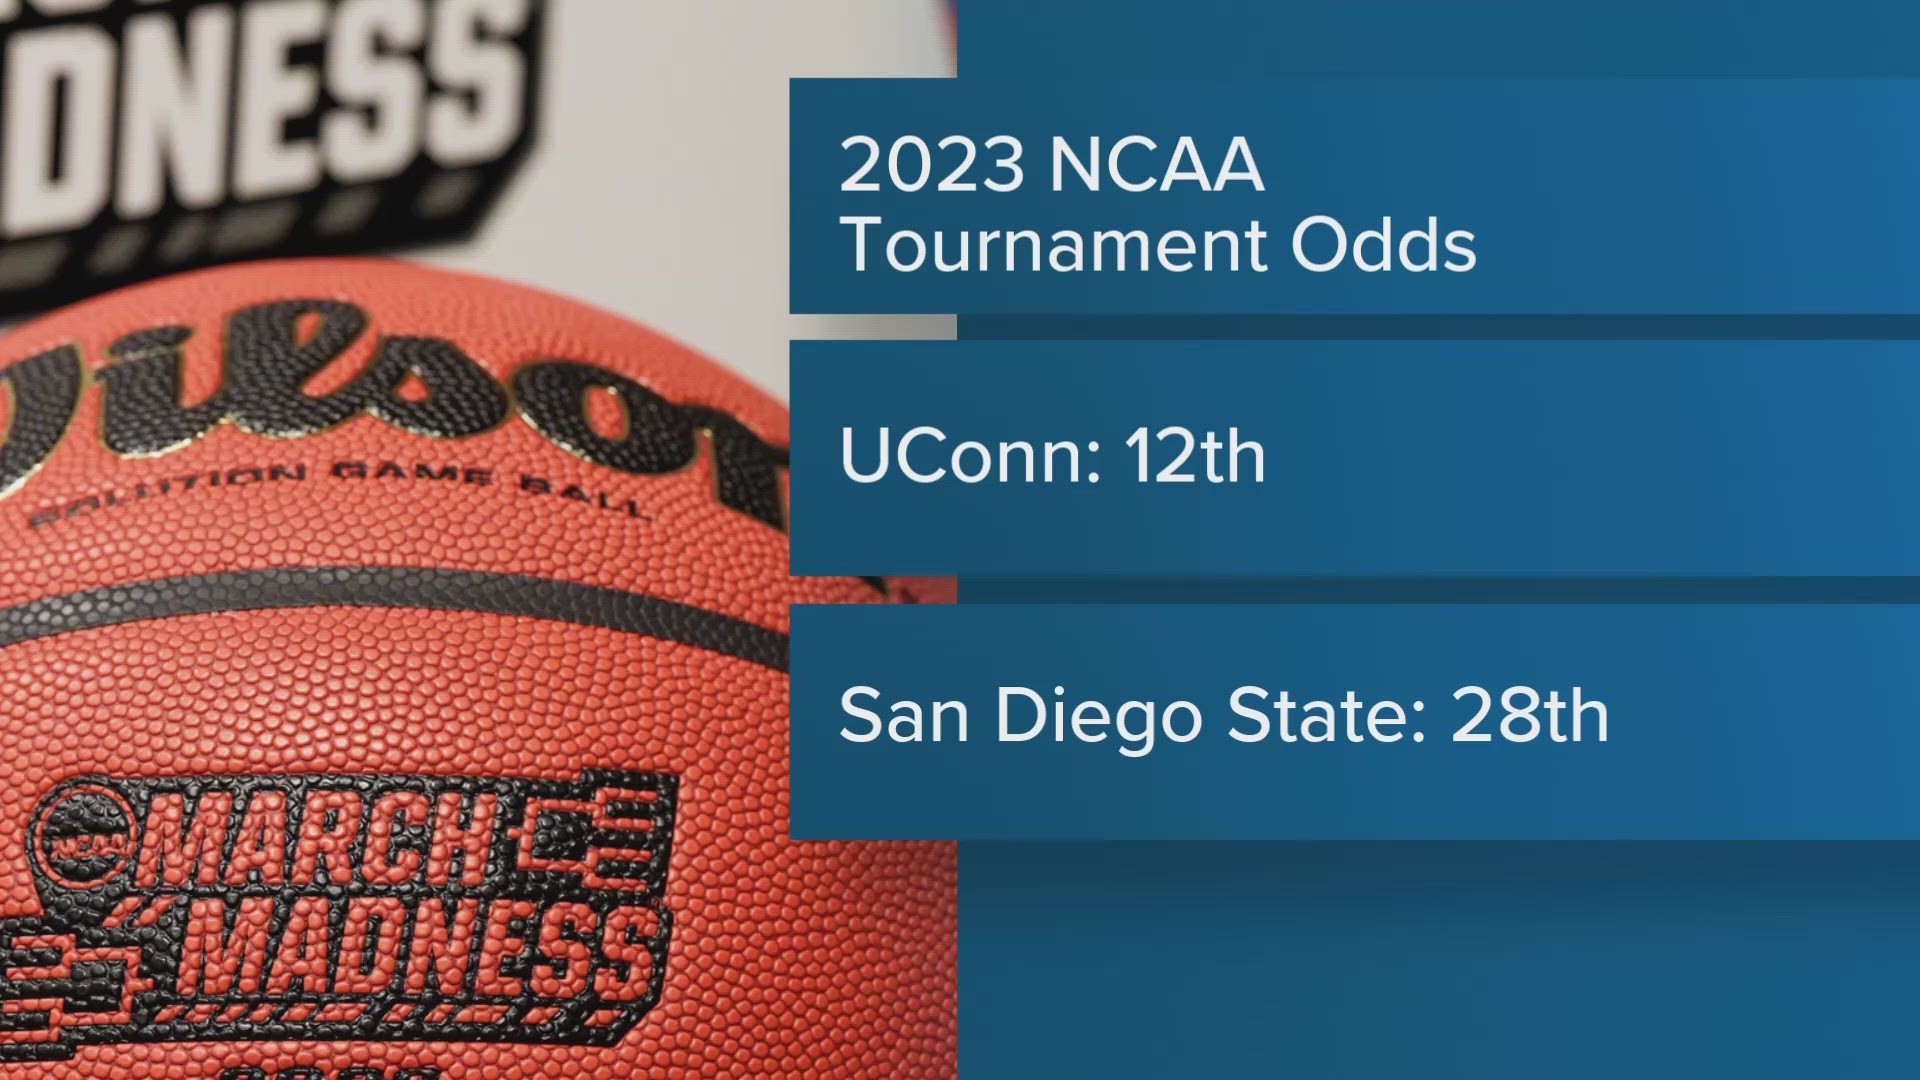 UConn and San Diego State will battle for the title.